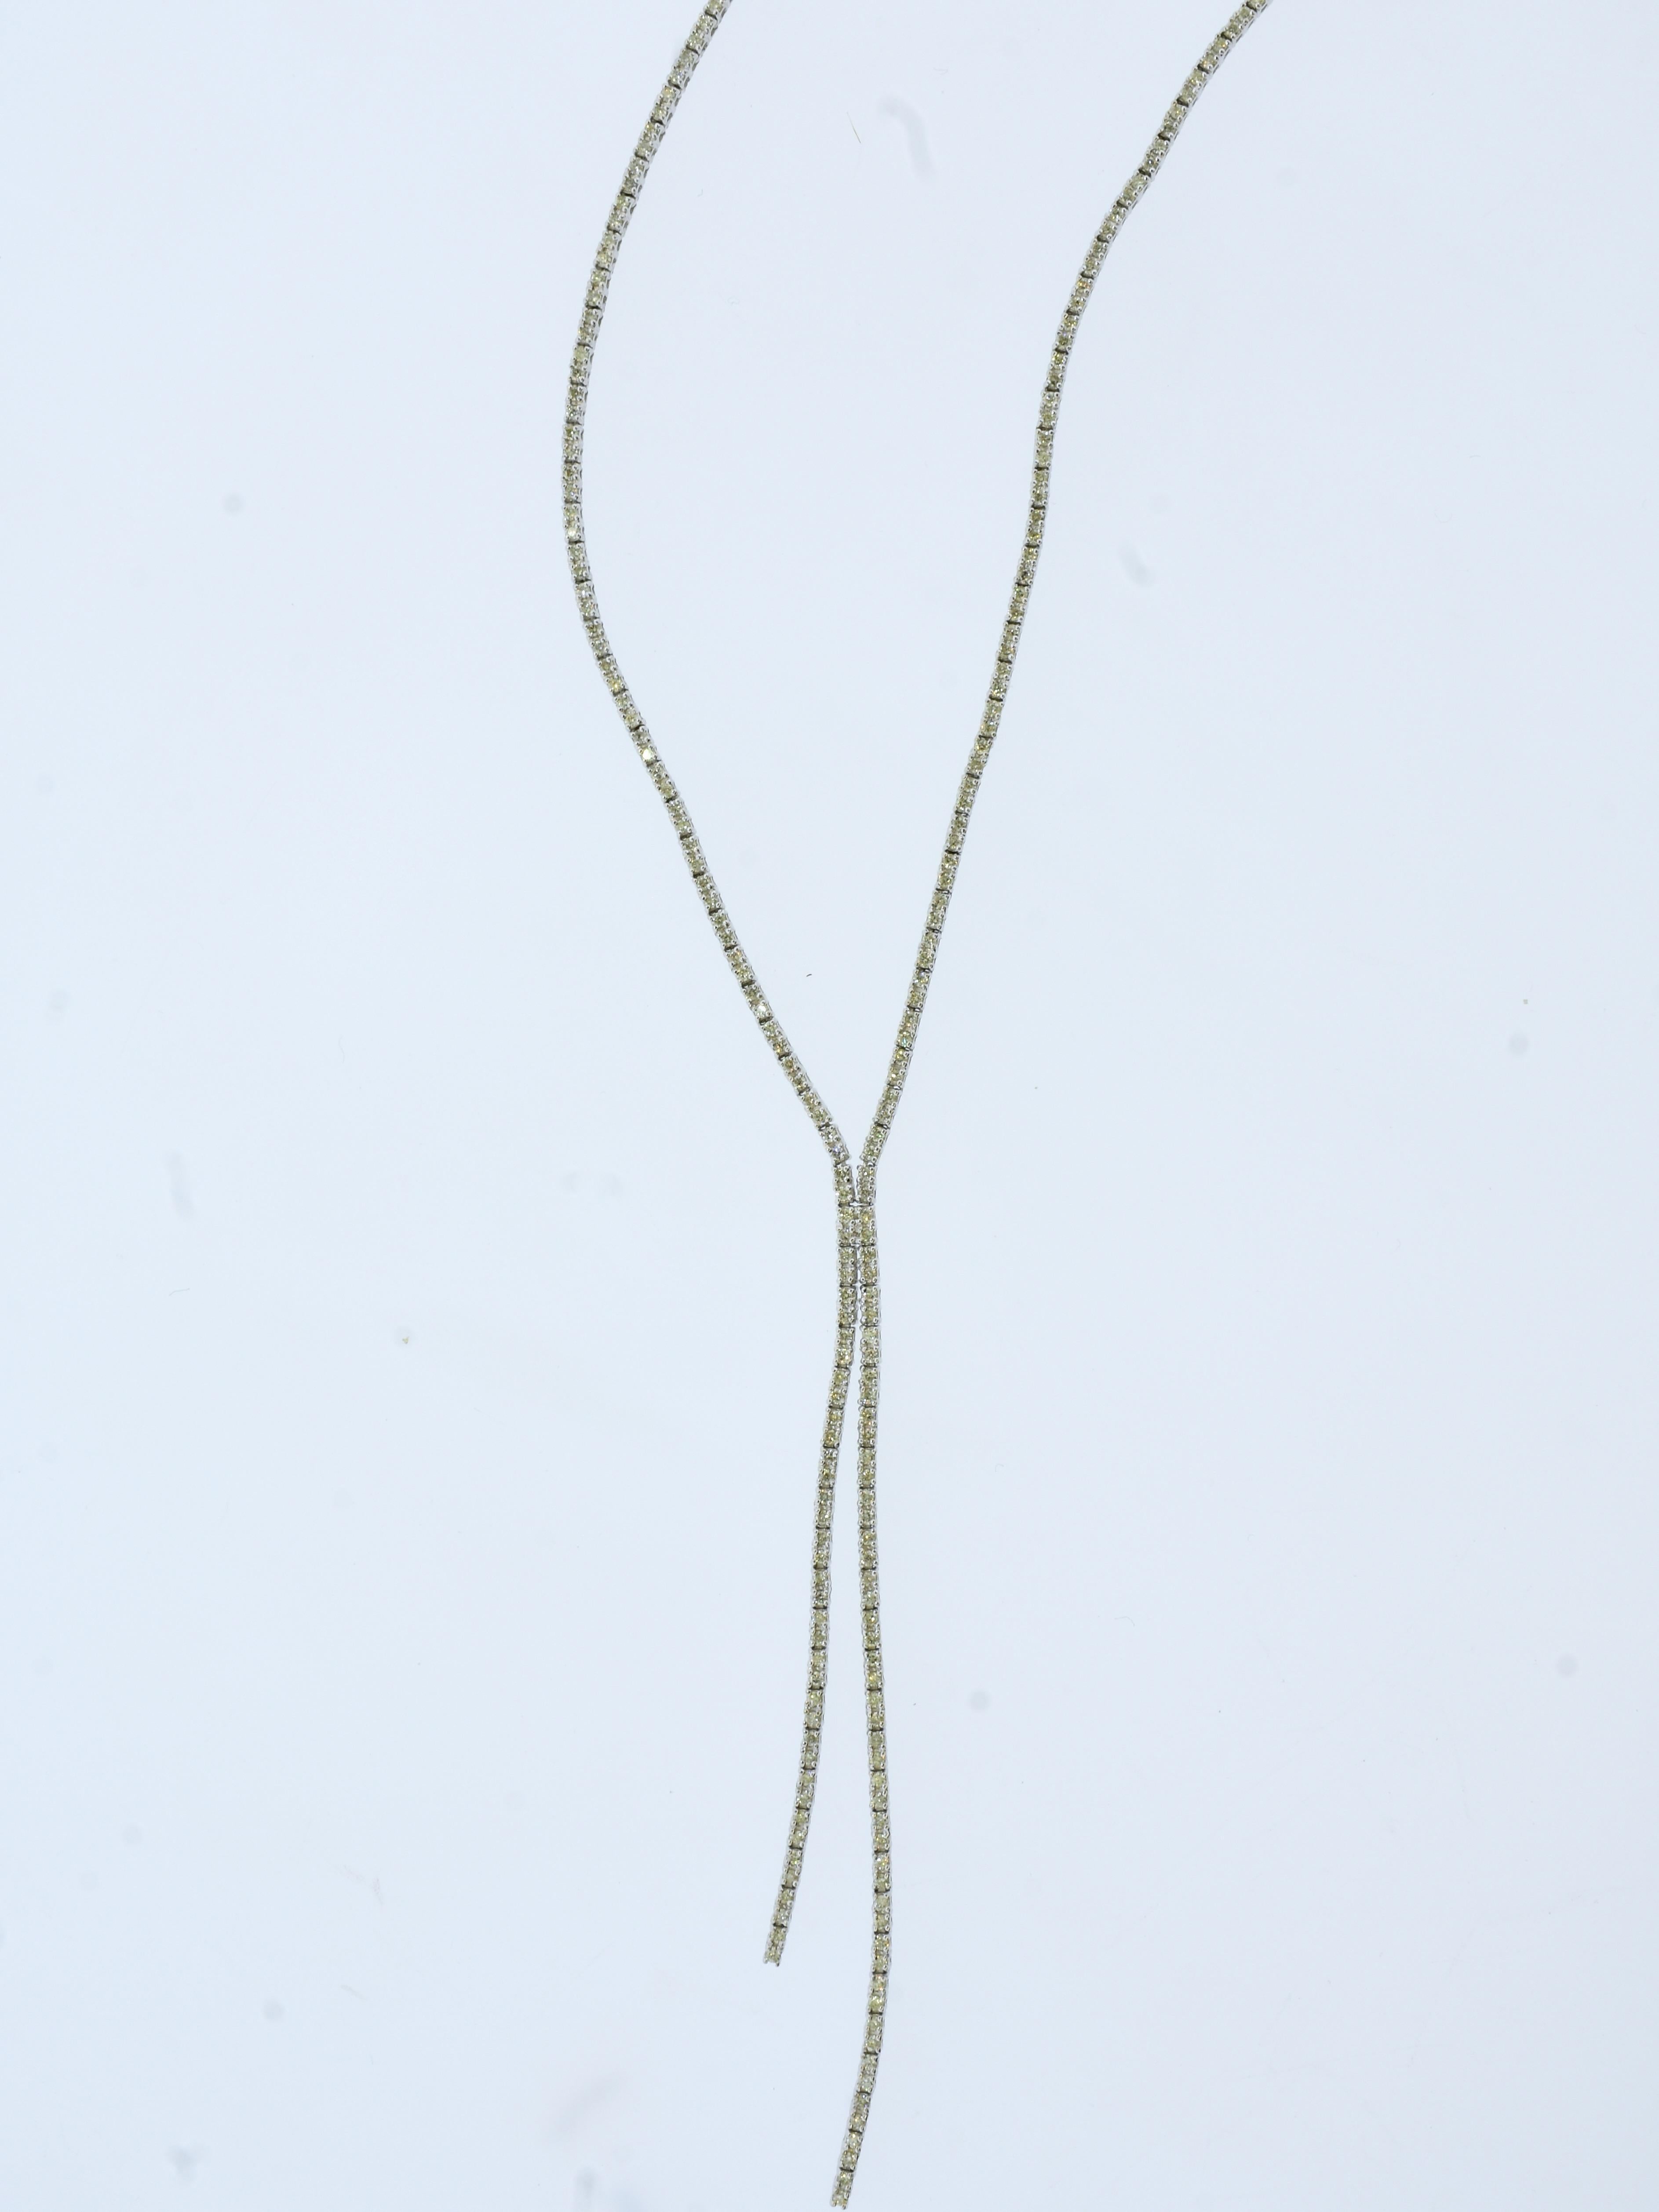 Diamond Necklace with 3 cts. of Fine Round Diamonds and over 23 inches long For Sale 1